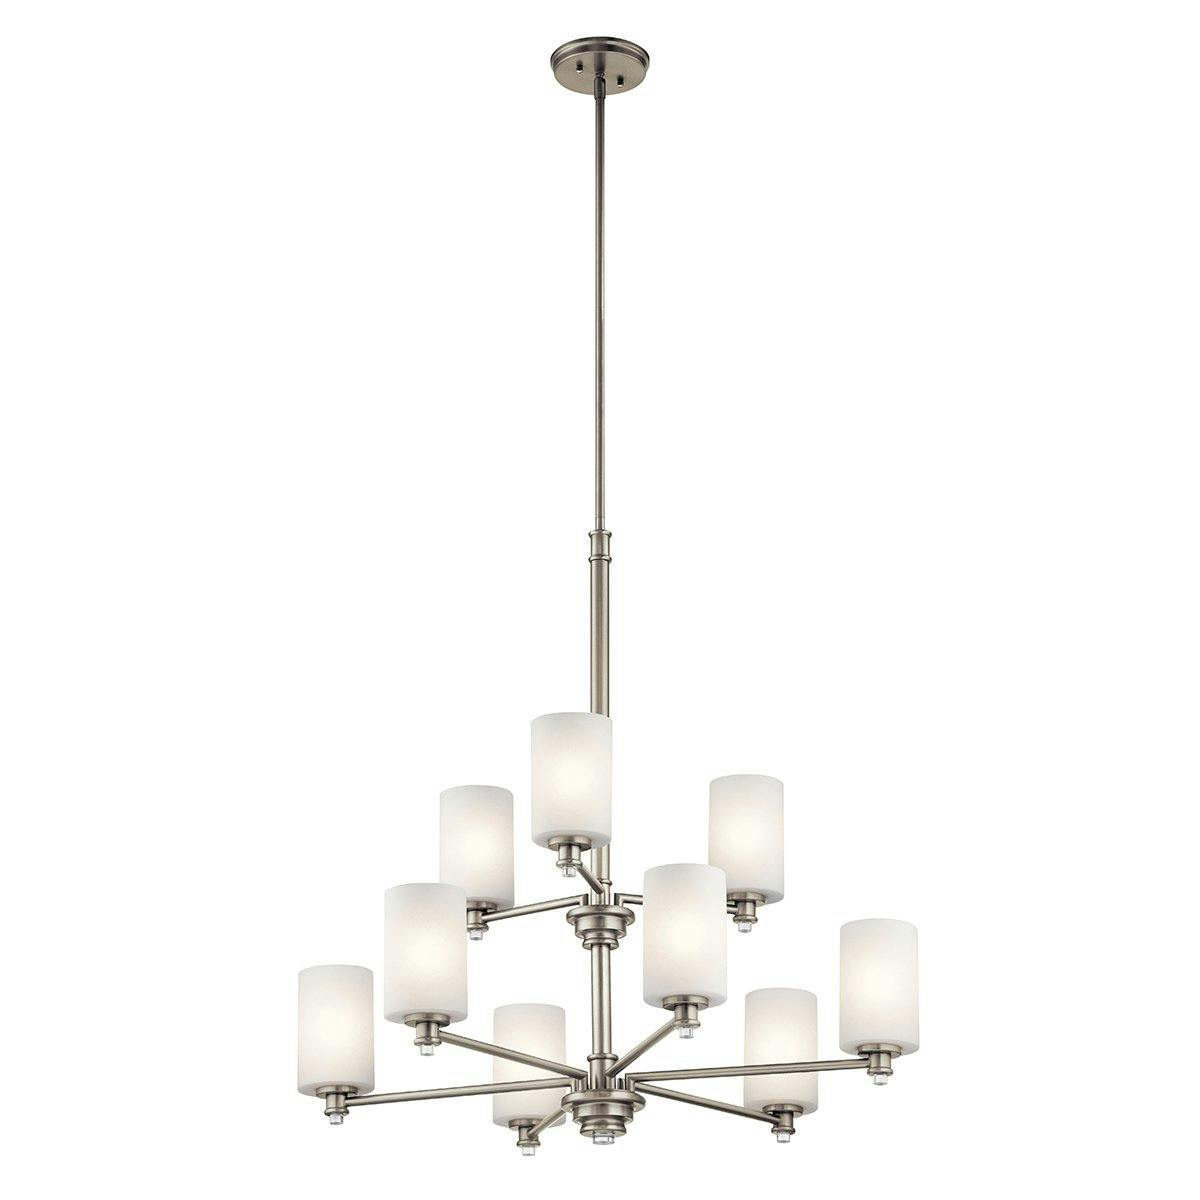 Joelson 9 Light Chandelier Brushed Nickel on a white background